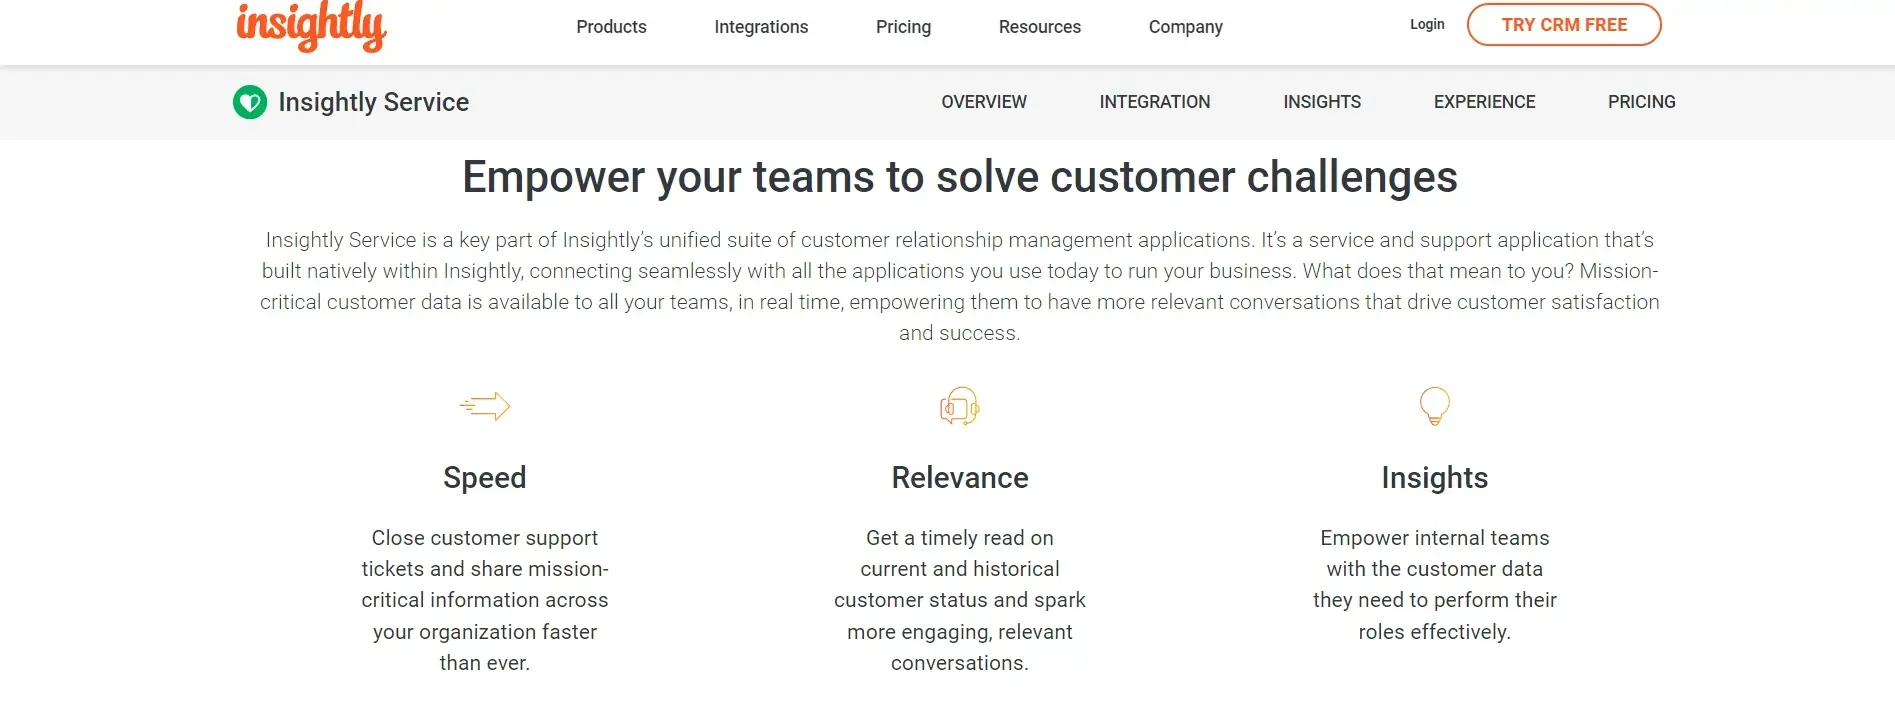 How responsive and effective is Insightly's customer service?